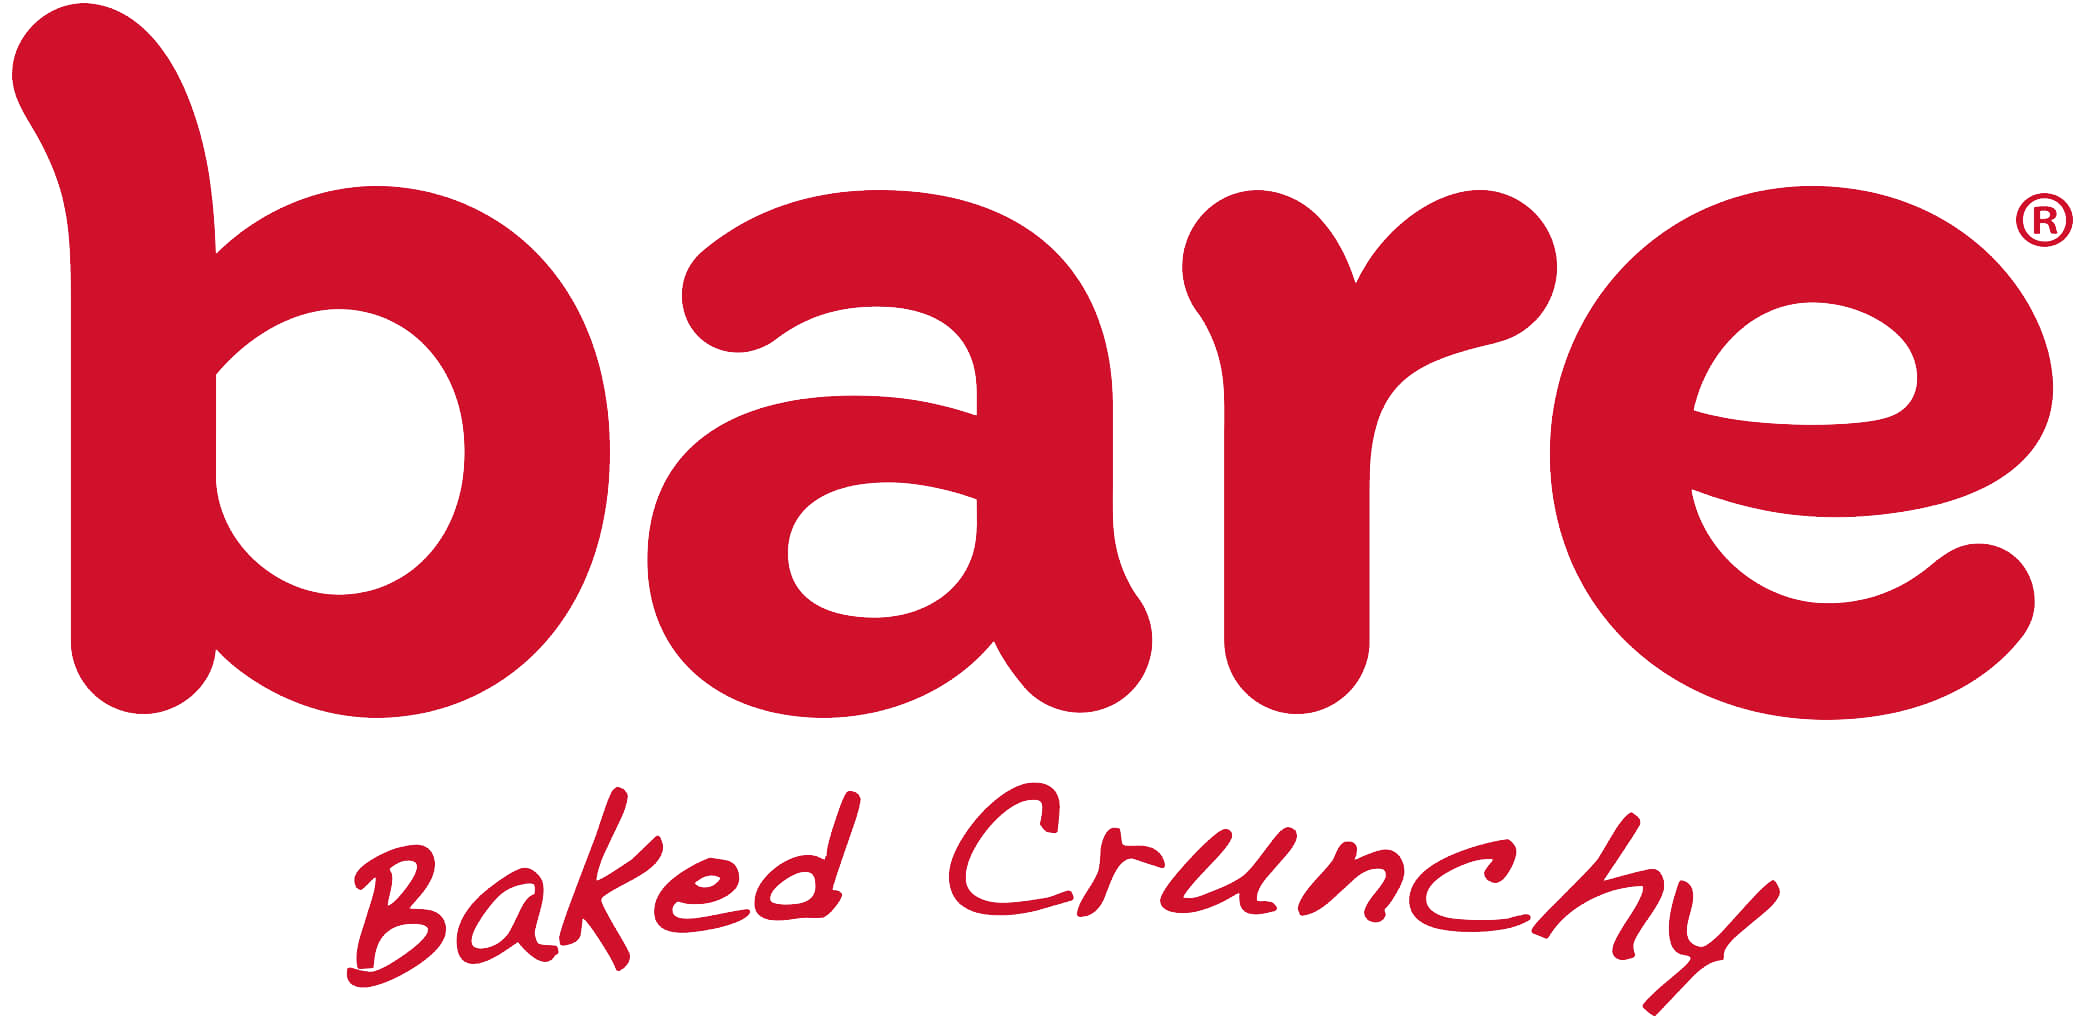 bare.png